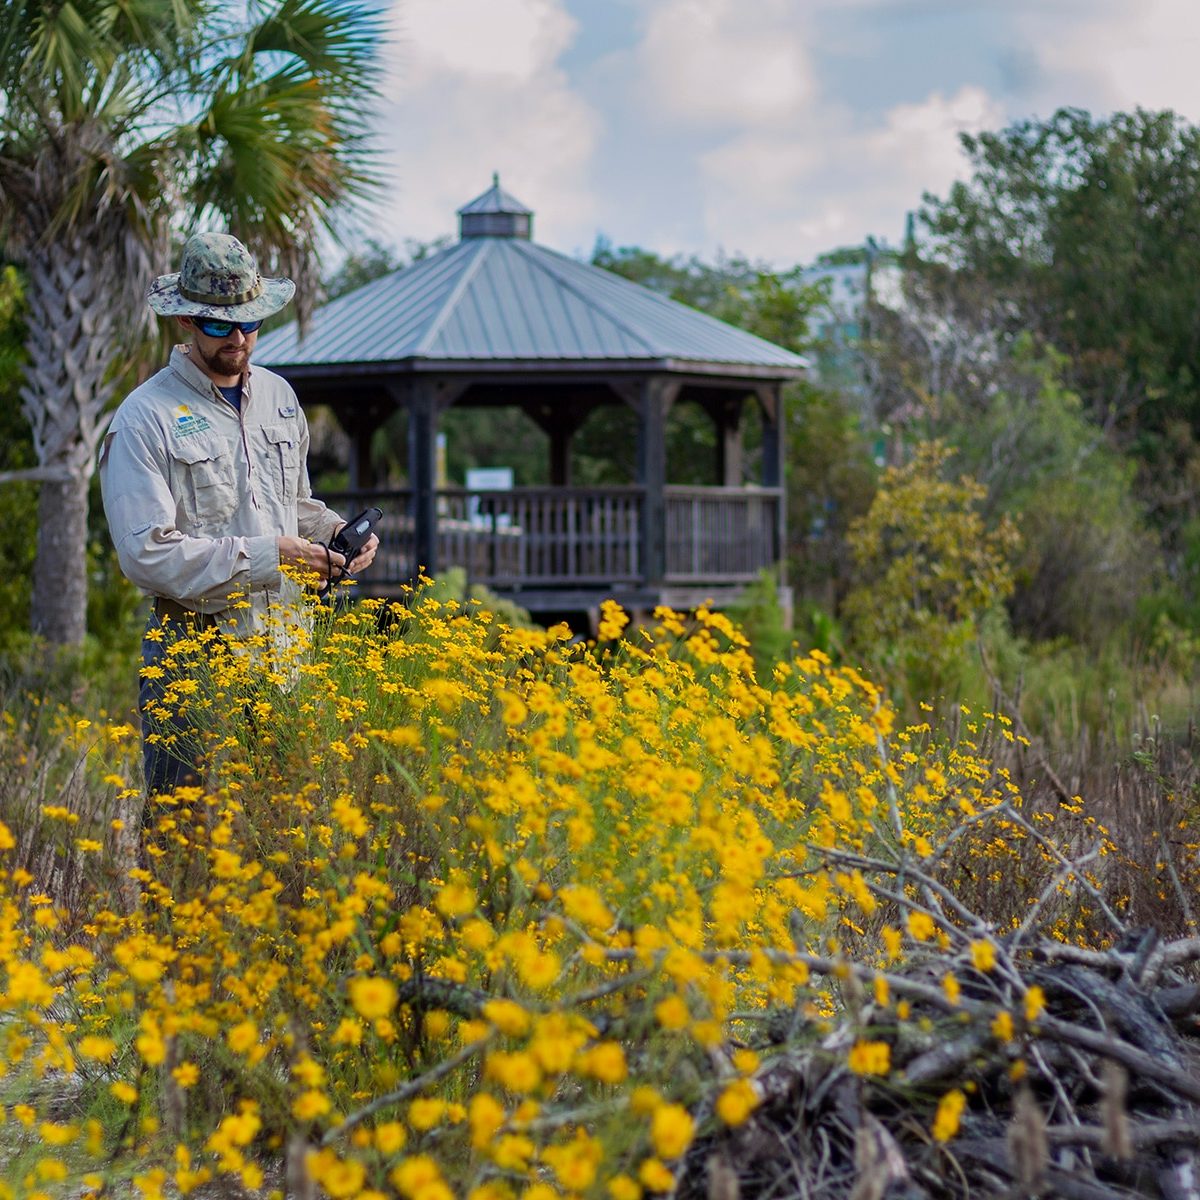 Conservancy of Southwest Florida biologist surveying species surrounded by yellow flowers